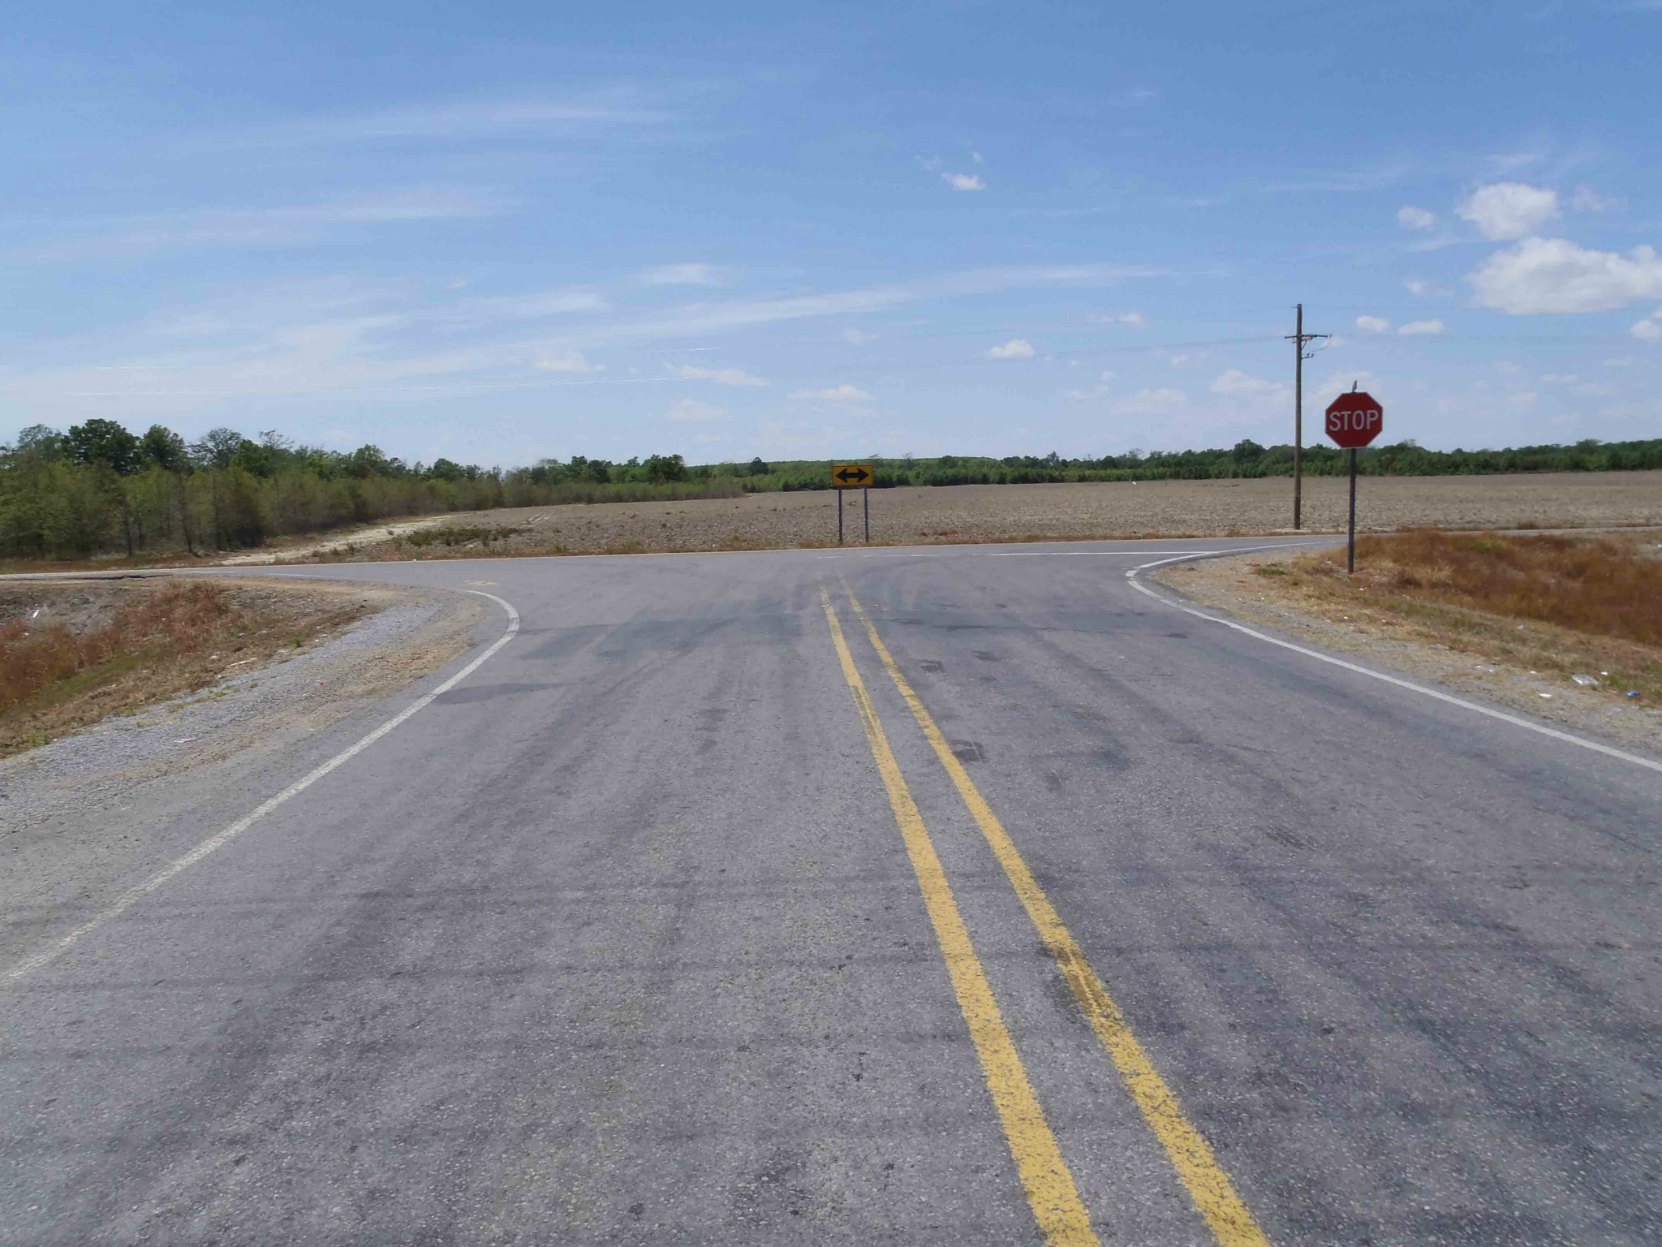 The second reputed site of Robert Johnson's poisoning in 1938, Highway 7 and Leflore County Road 512, near Quito, Leflore County, Mississippi, looking west.